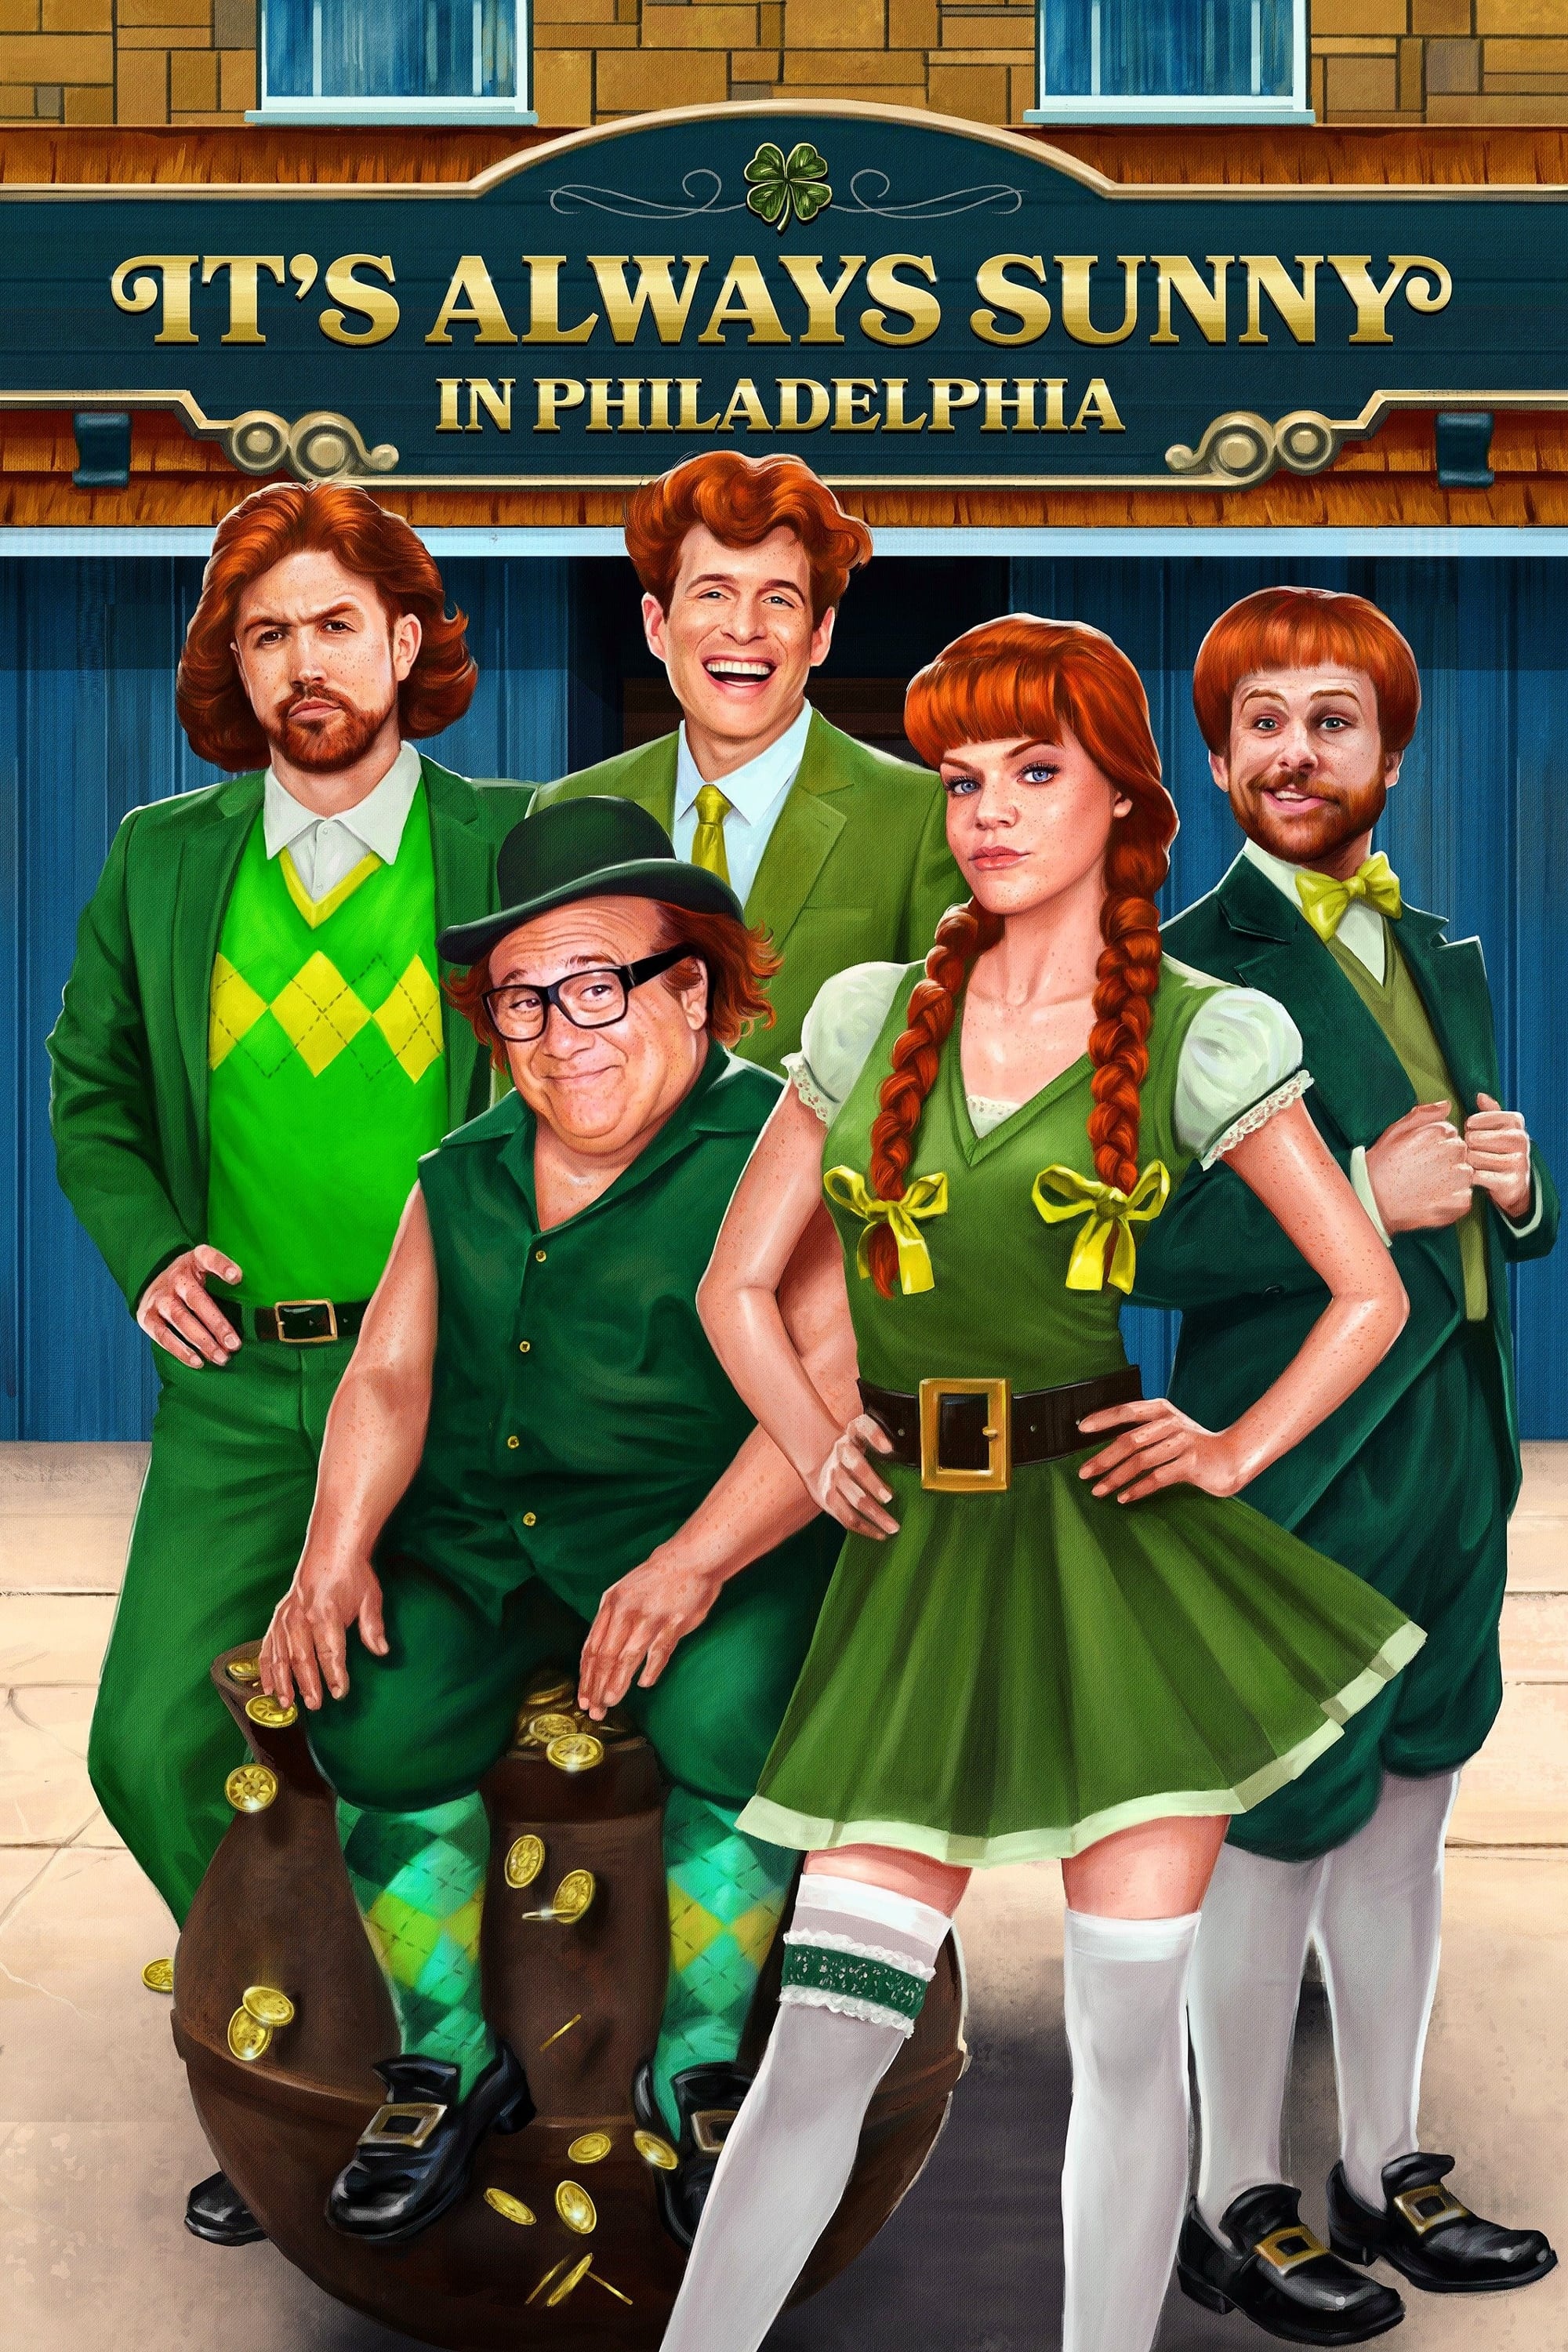 It's Always Sunny in Philadelphia (TV Series): An Irish bar, Paddy's Pub, Frank Reynolds, An eccentric millionaire who takes over most of the ownership. 2000x3000 HD Background.